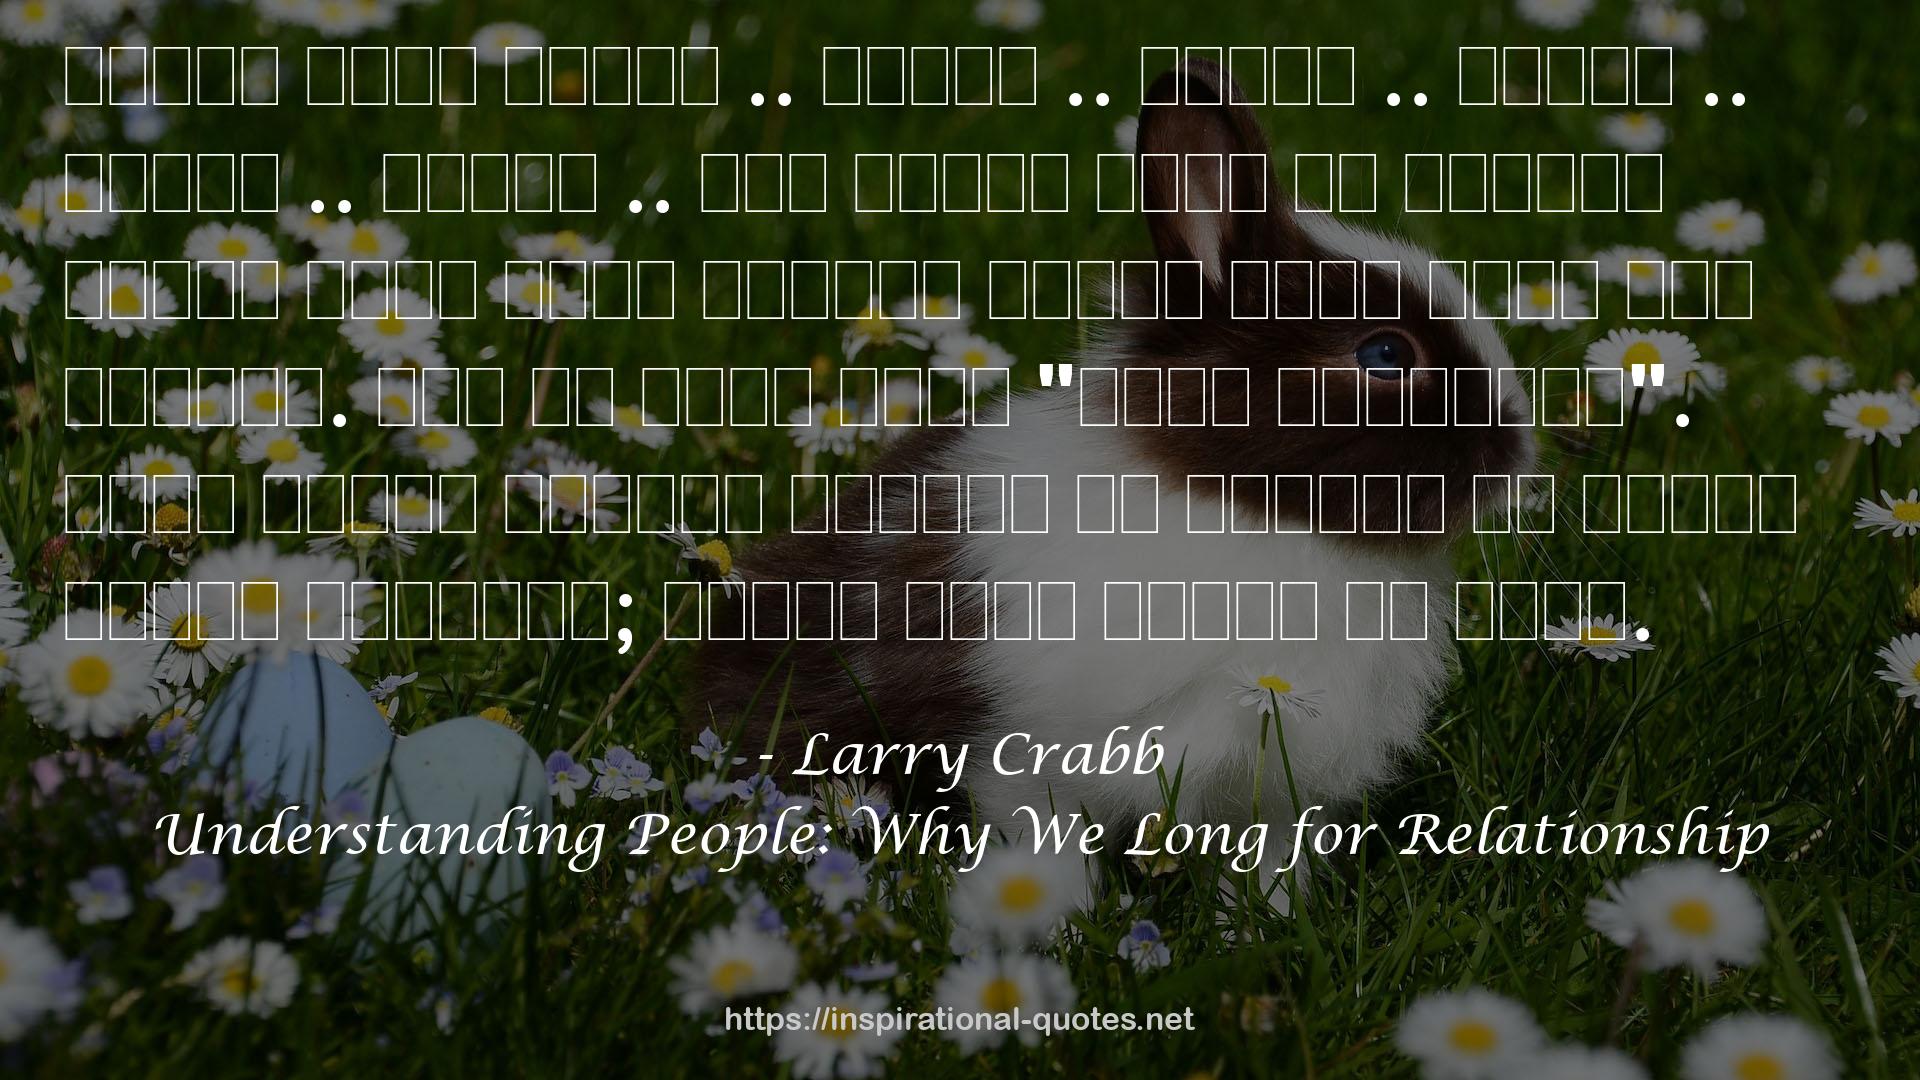 Understanding People: Why We Long for Relationship QUOTES